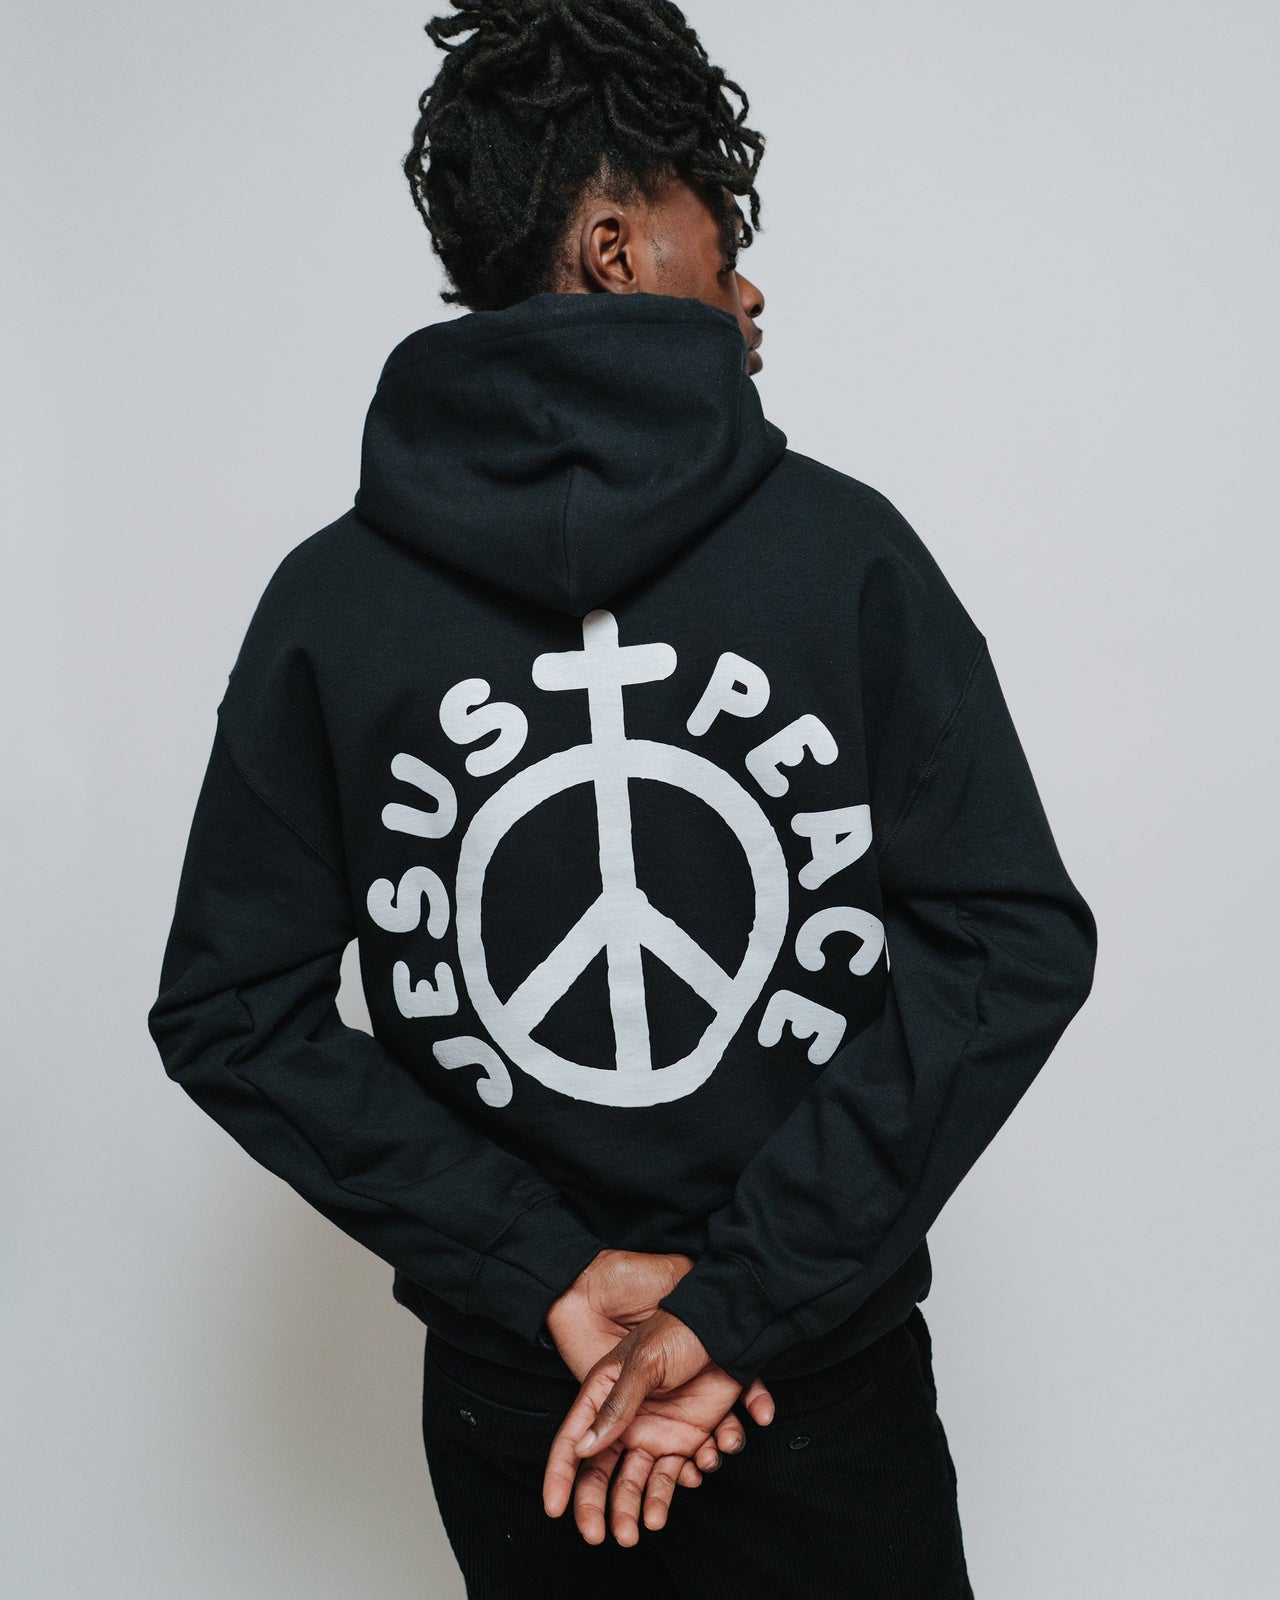 "Jesus Peace" Christian Hoodie Sweatshirt in Royal for the modern day Jesus People movement. Inspired by the words of 2 Thessalonians. Made in the USA by NHIM Apparel Christian Clothing Brand